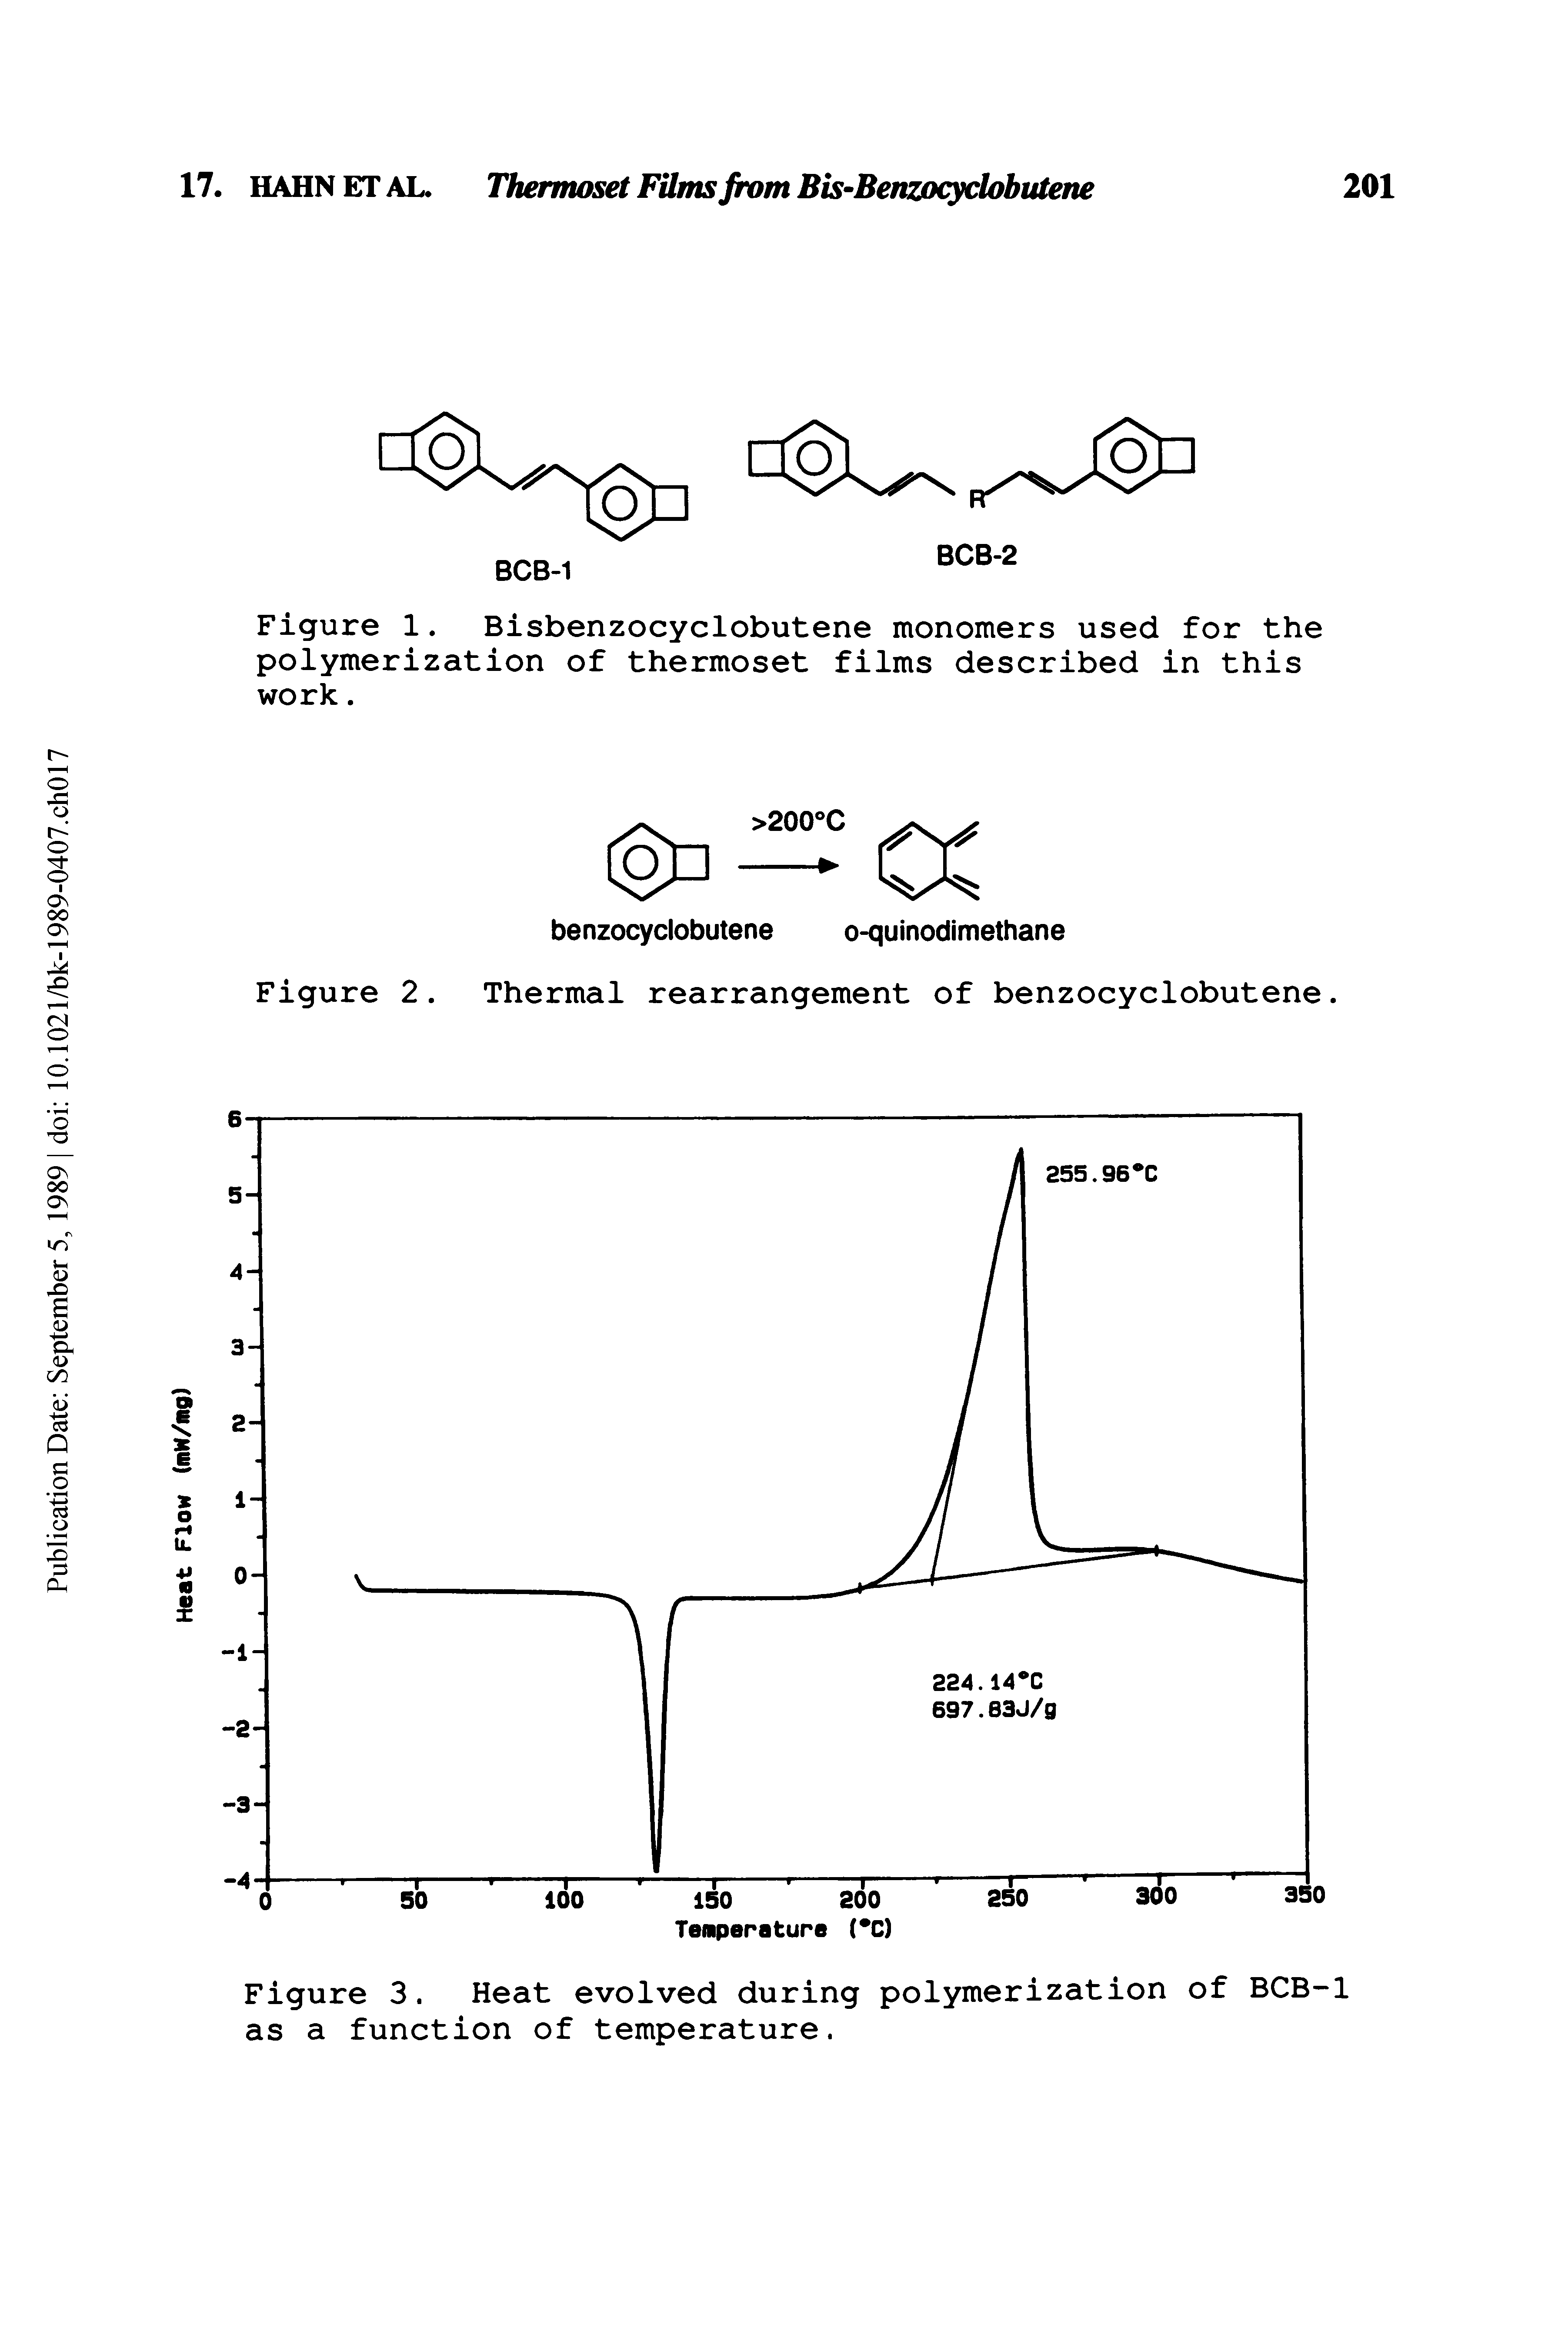 Figure 3. Heat evolved during polymerization of BCB-1 as a function of temperature.